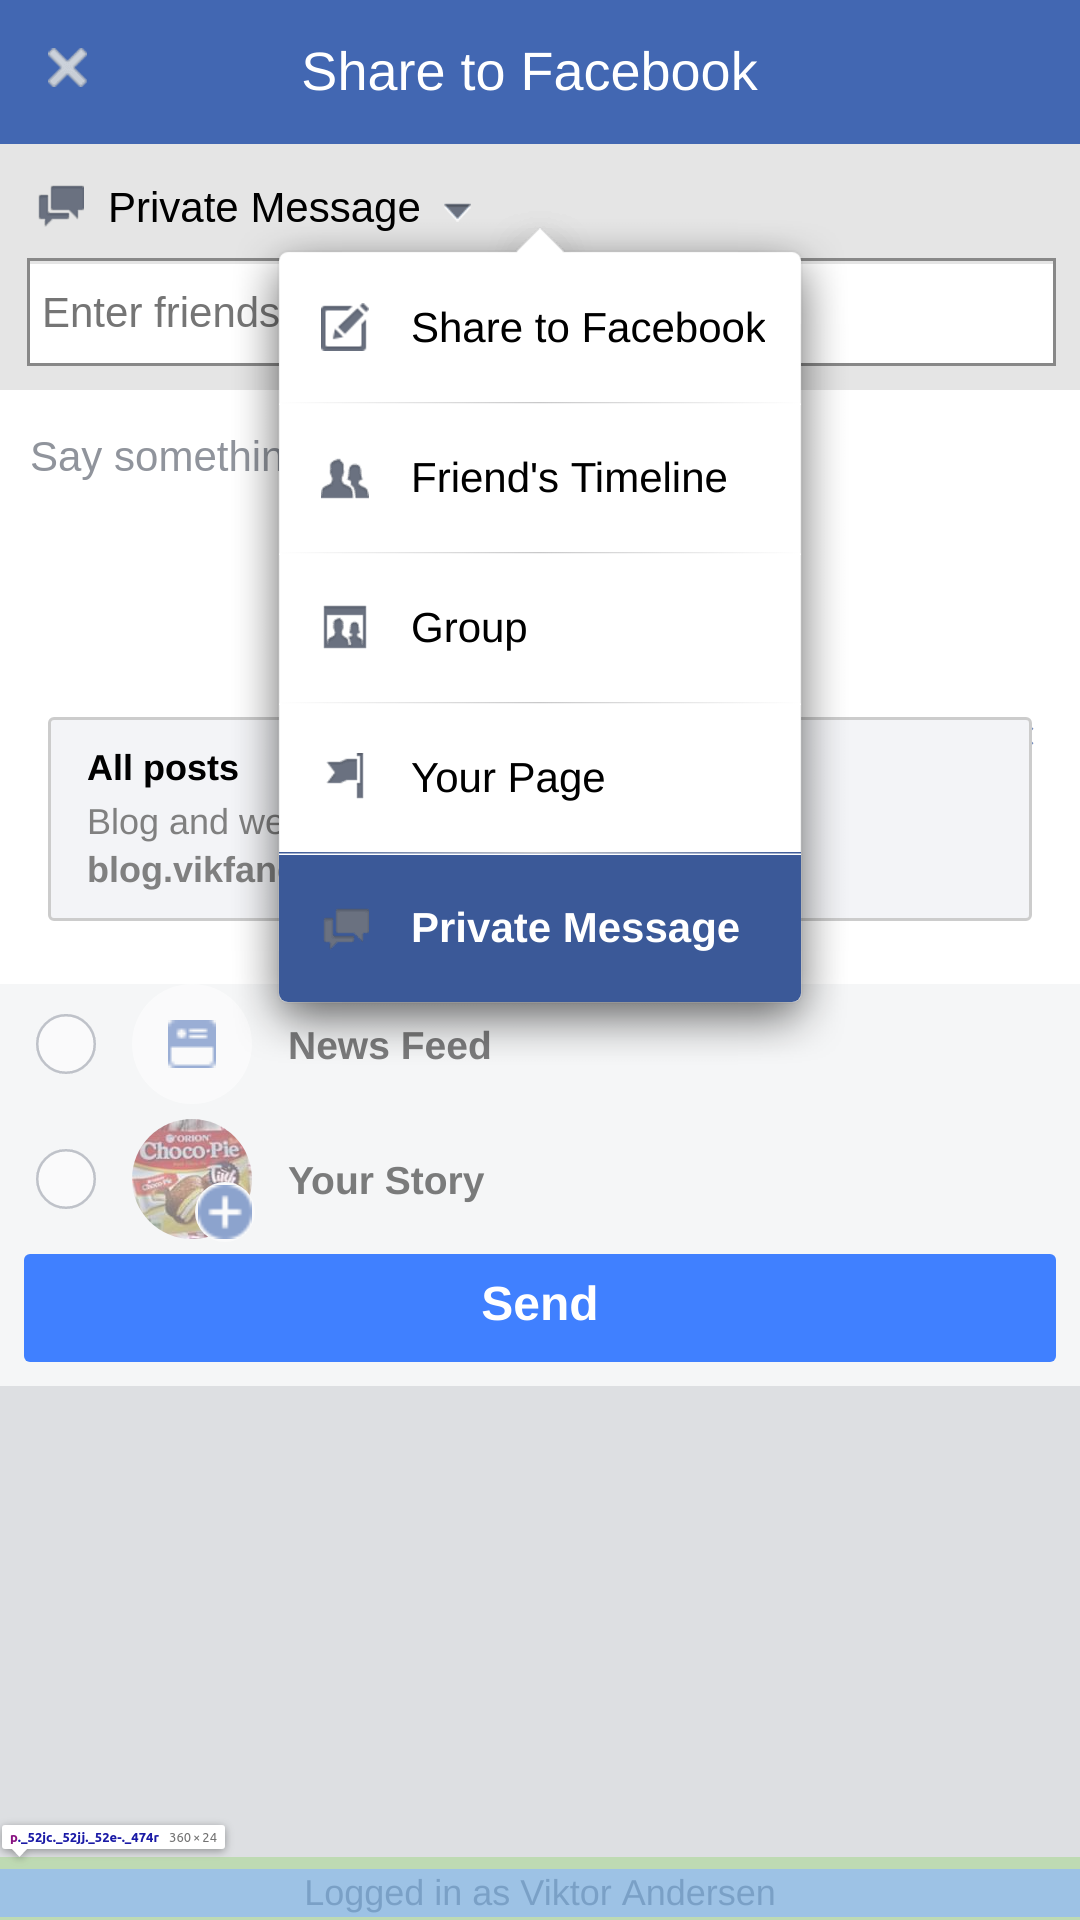 Step 2: Click share with friends.